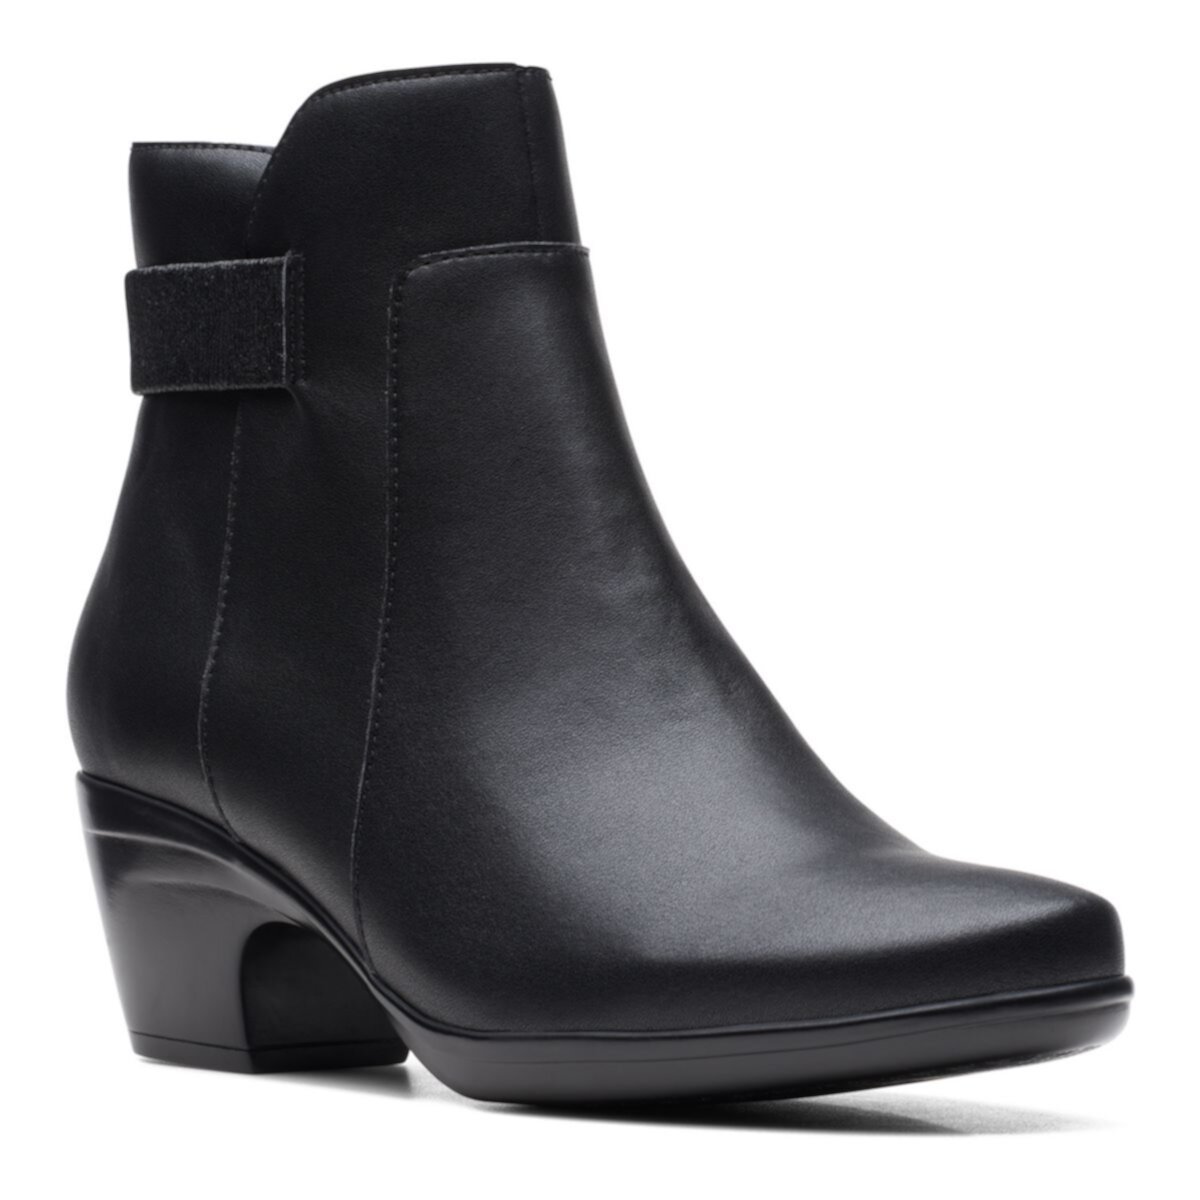 Emily holly ankle boots